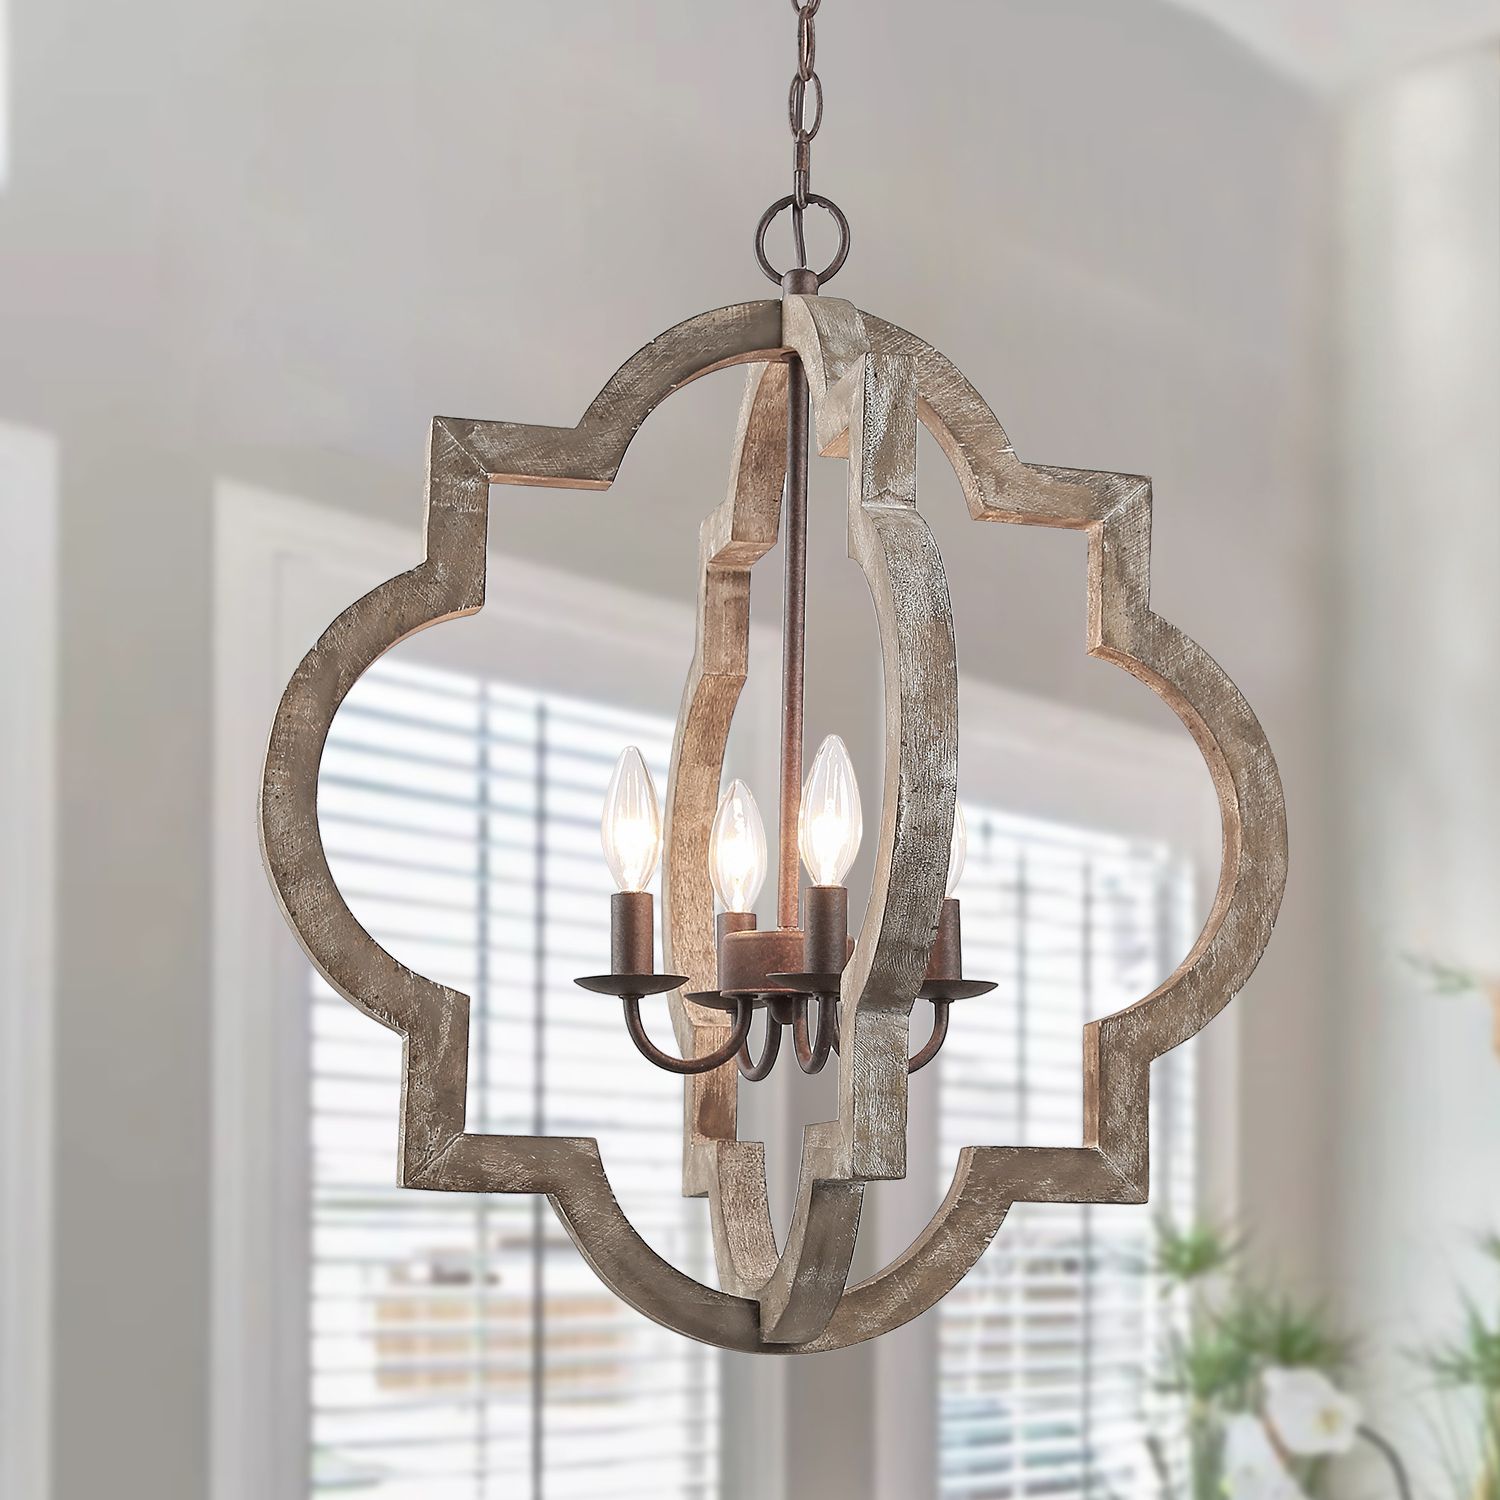 Lnc Farmhouse Lantern Chandelier, Handmade Wood 4 Light Fixtures Hanging  For Dining,living Room – Walmart Pertaining To 2020 Handcrafted Wood Lantern Chandeliers (View 10 of 15)